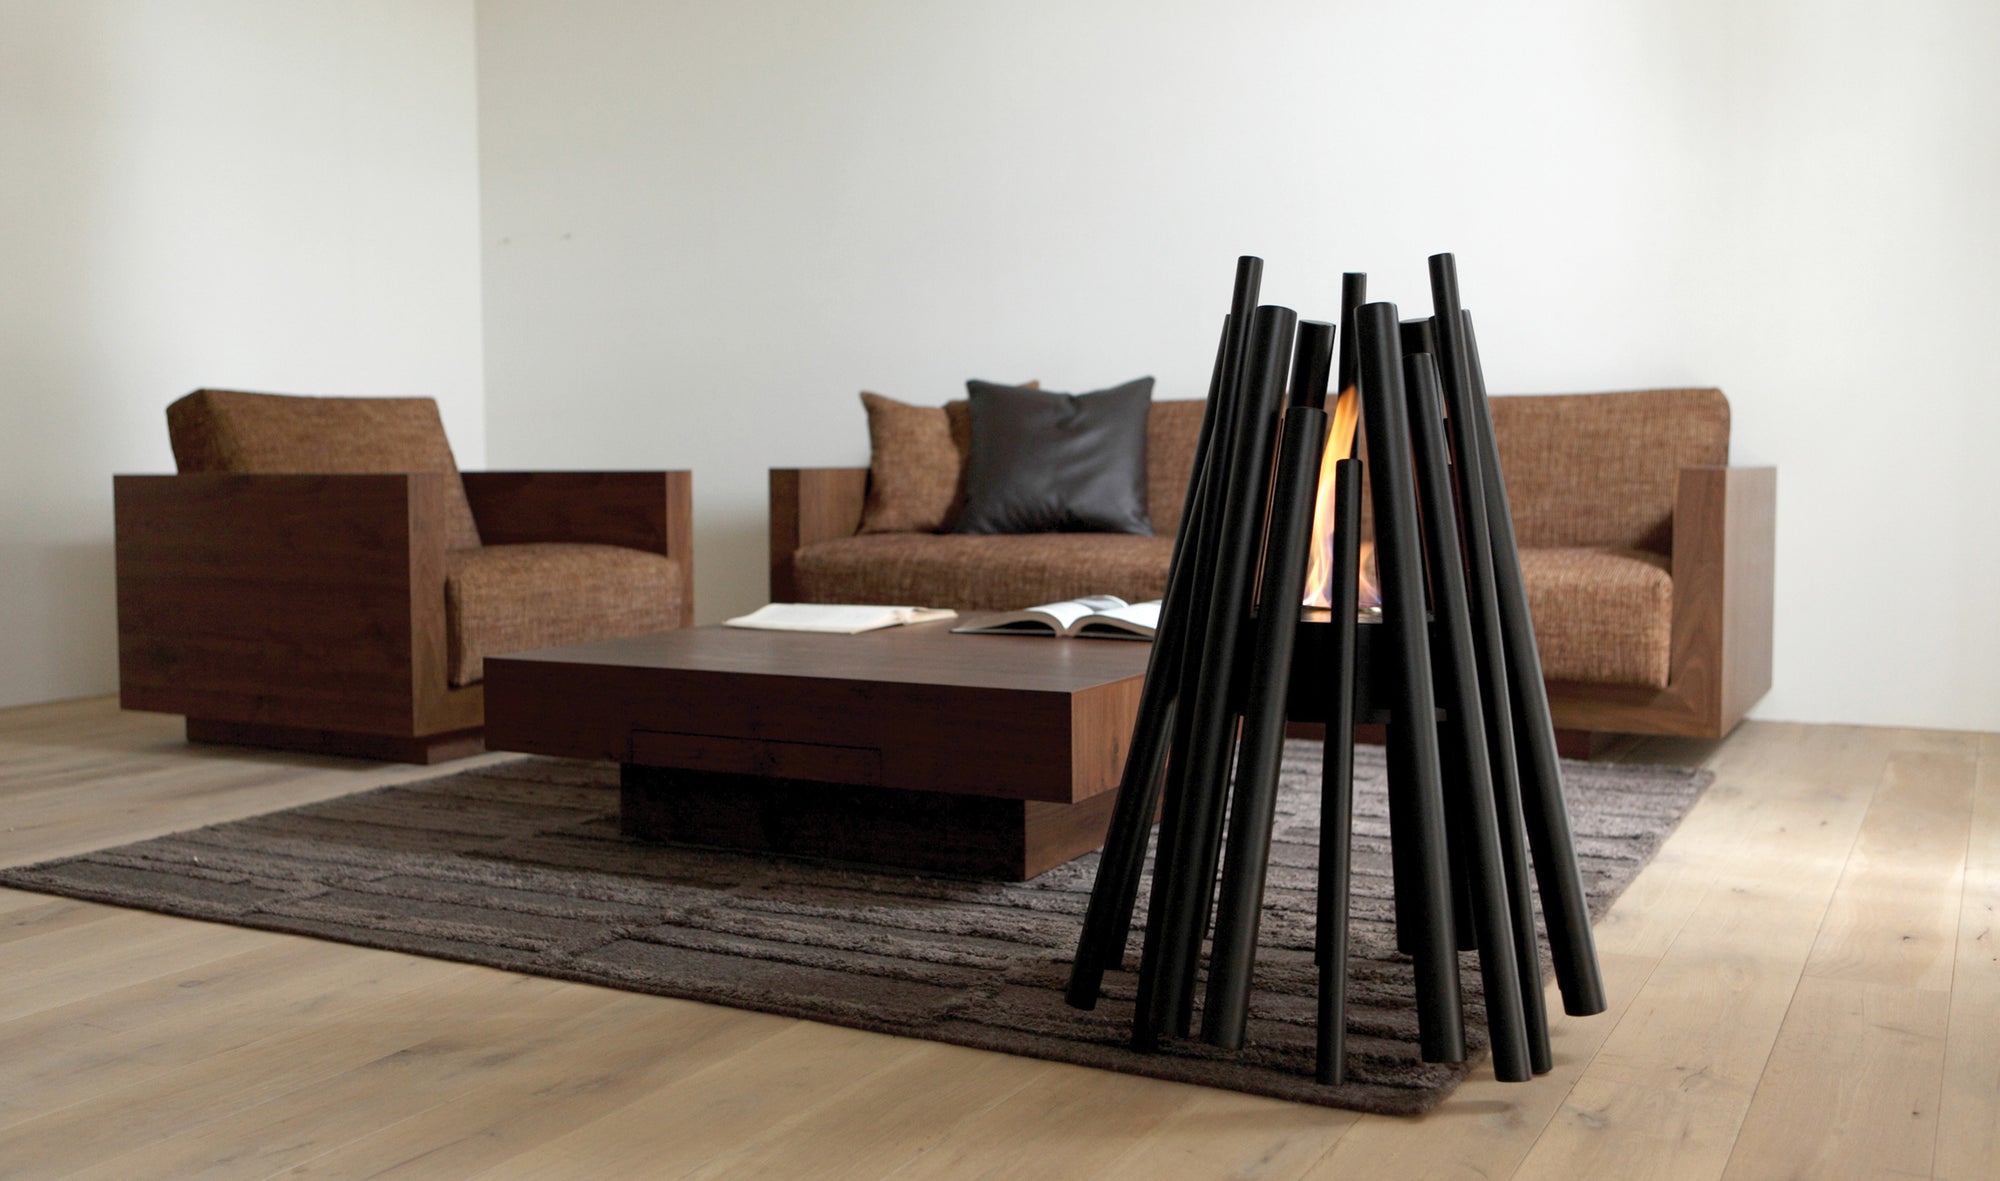 Enhance Your Space: Top Picks for Freestanding Ethanol Fireplaces